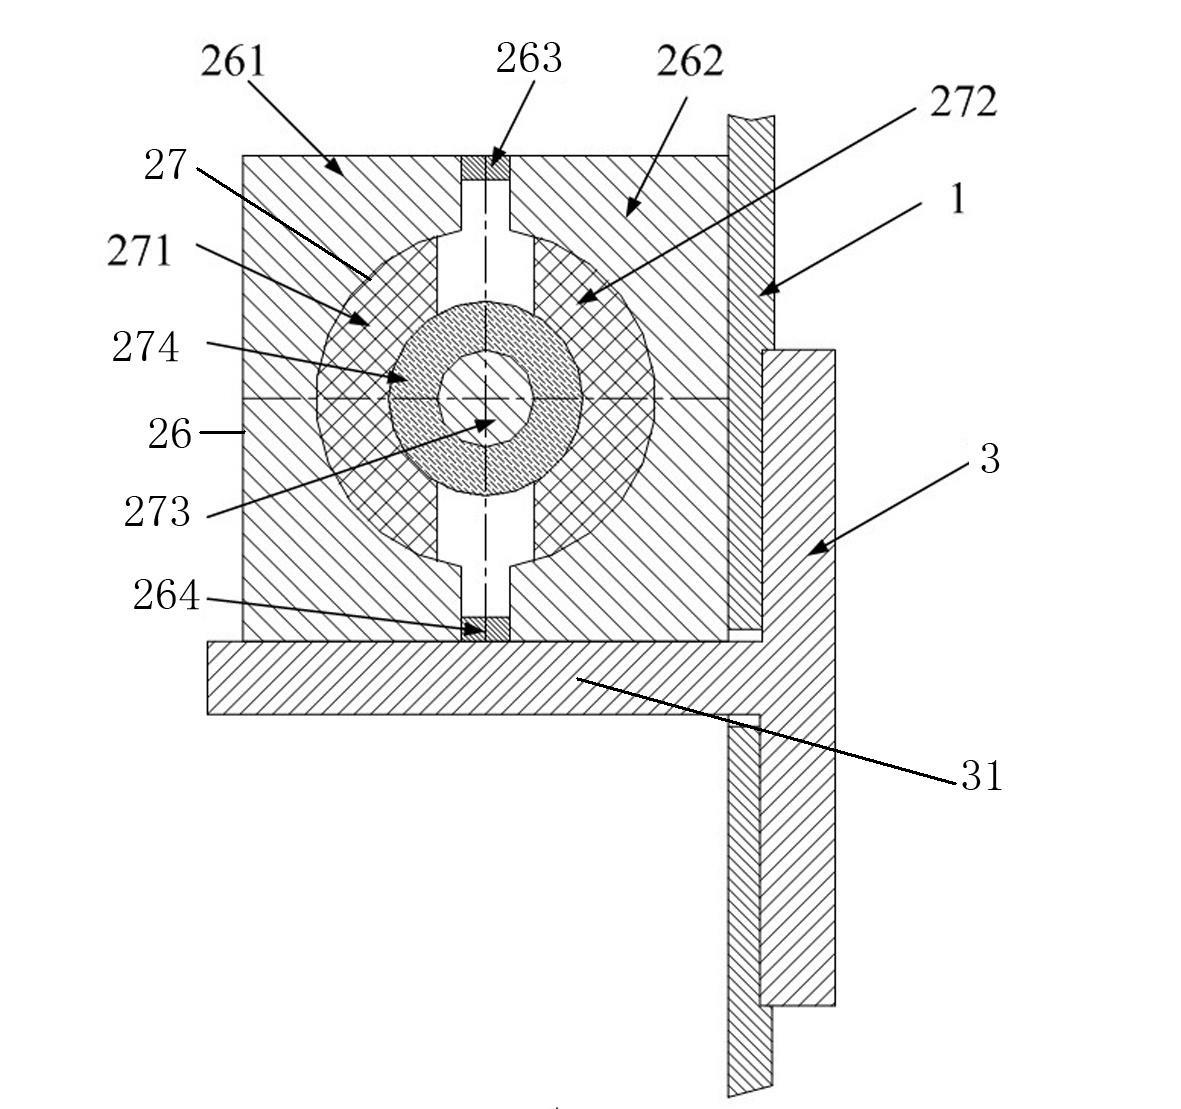 Positioning method for fixing T steel through magnetic force